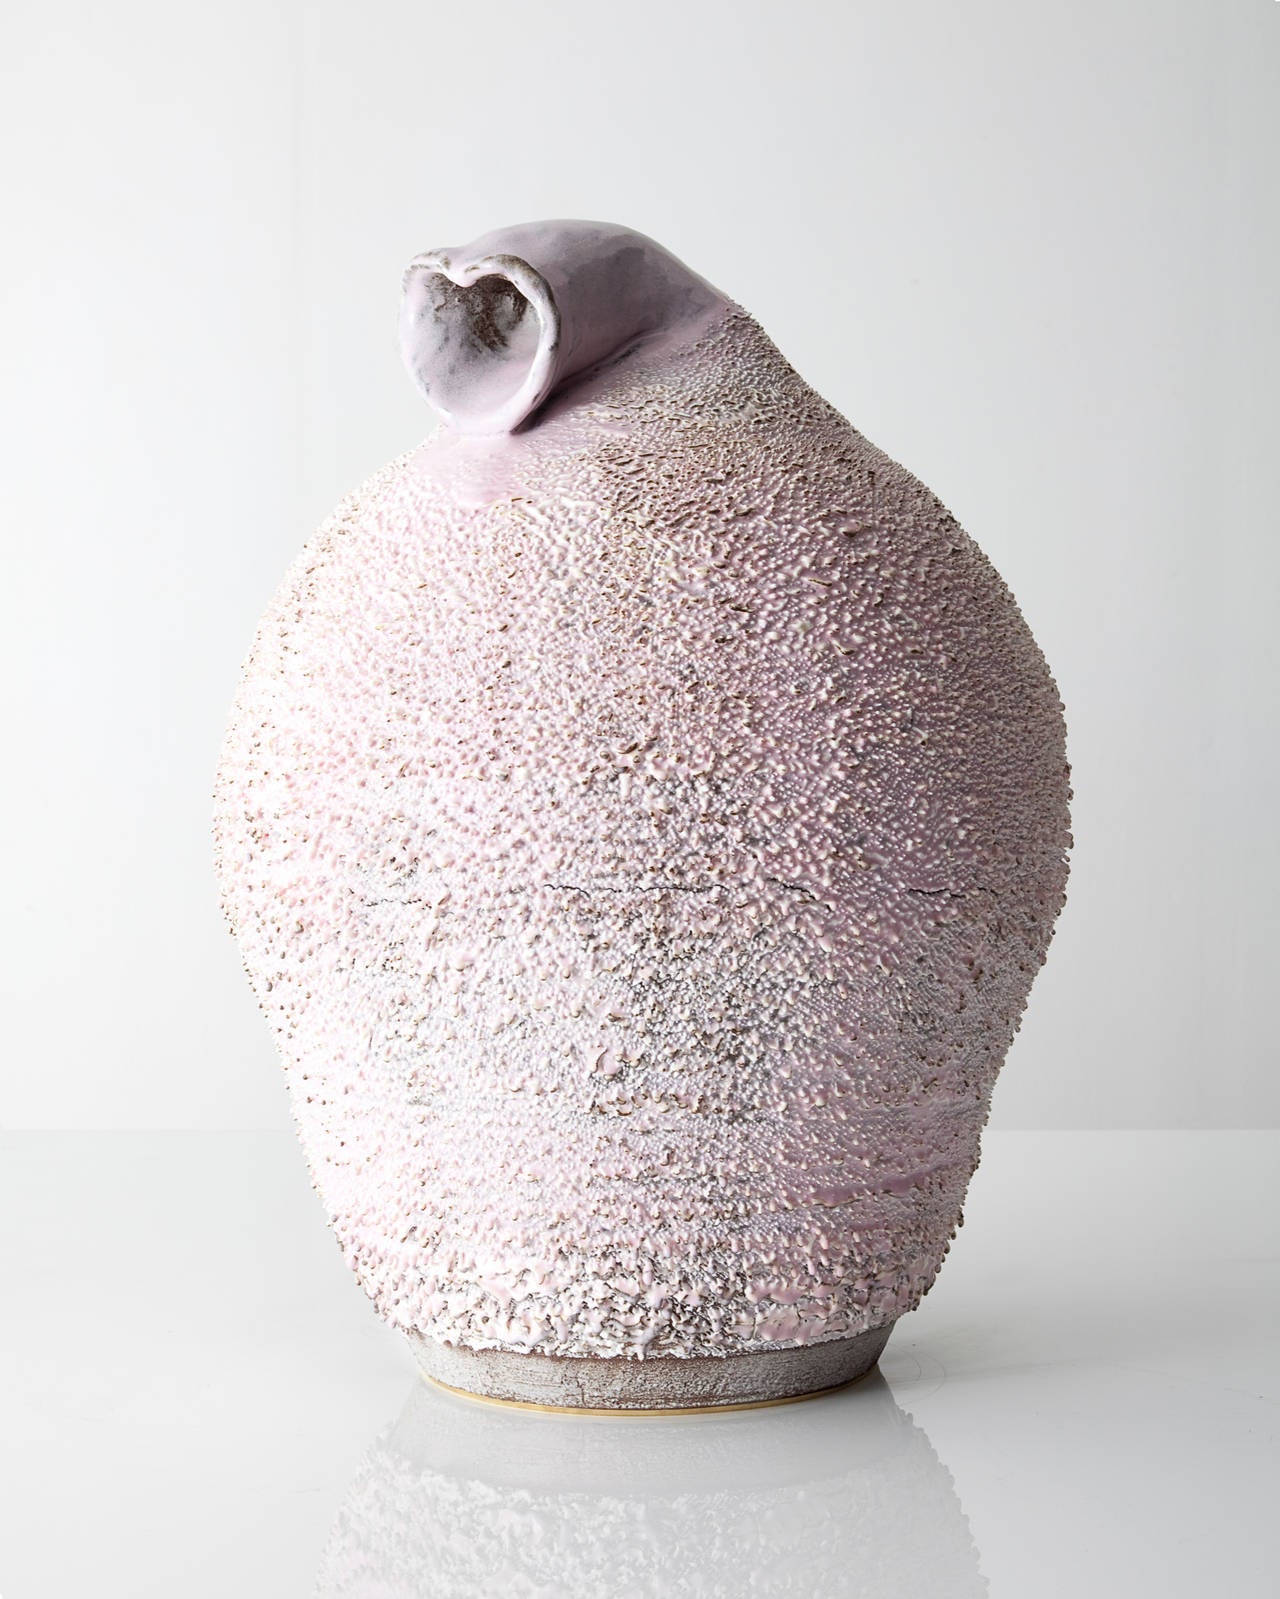 SM4675

Unique, hand-thrown Large Marge Dong On Stomach Accretion vase with porcelain slip in Angelyne glaze. Designed and made by the Haas Brothers, Los Angeles, CA, 2013.